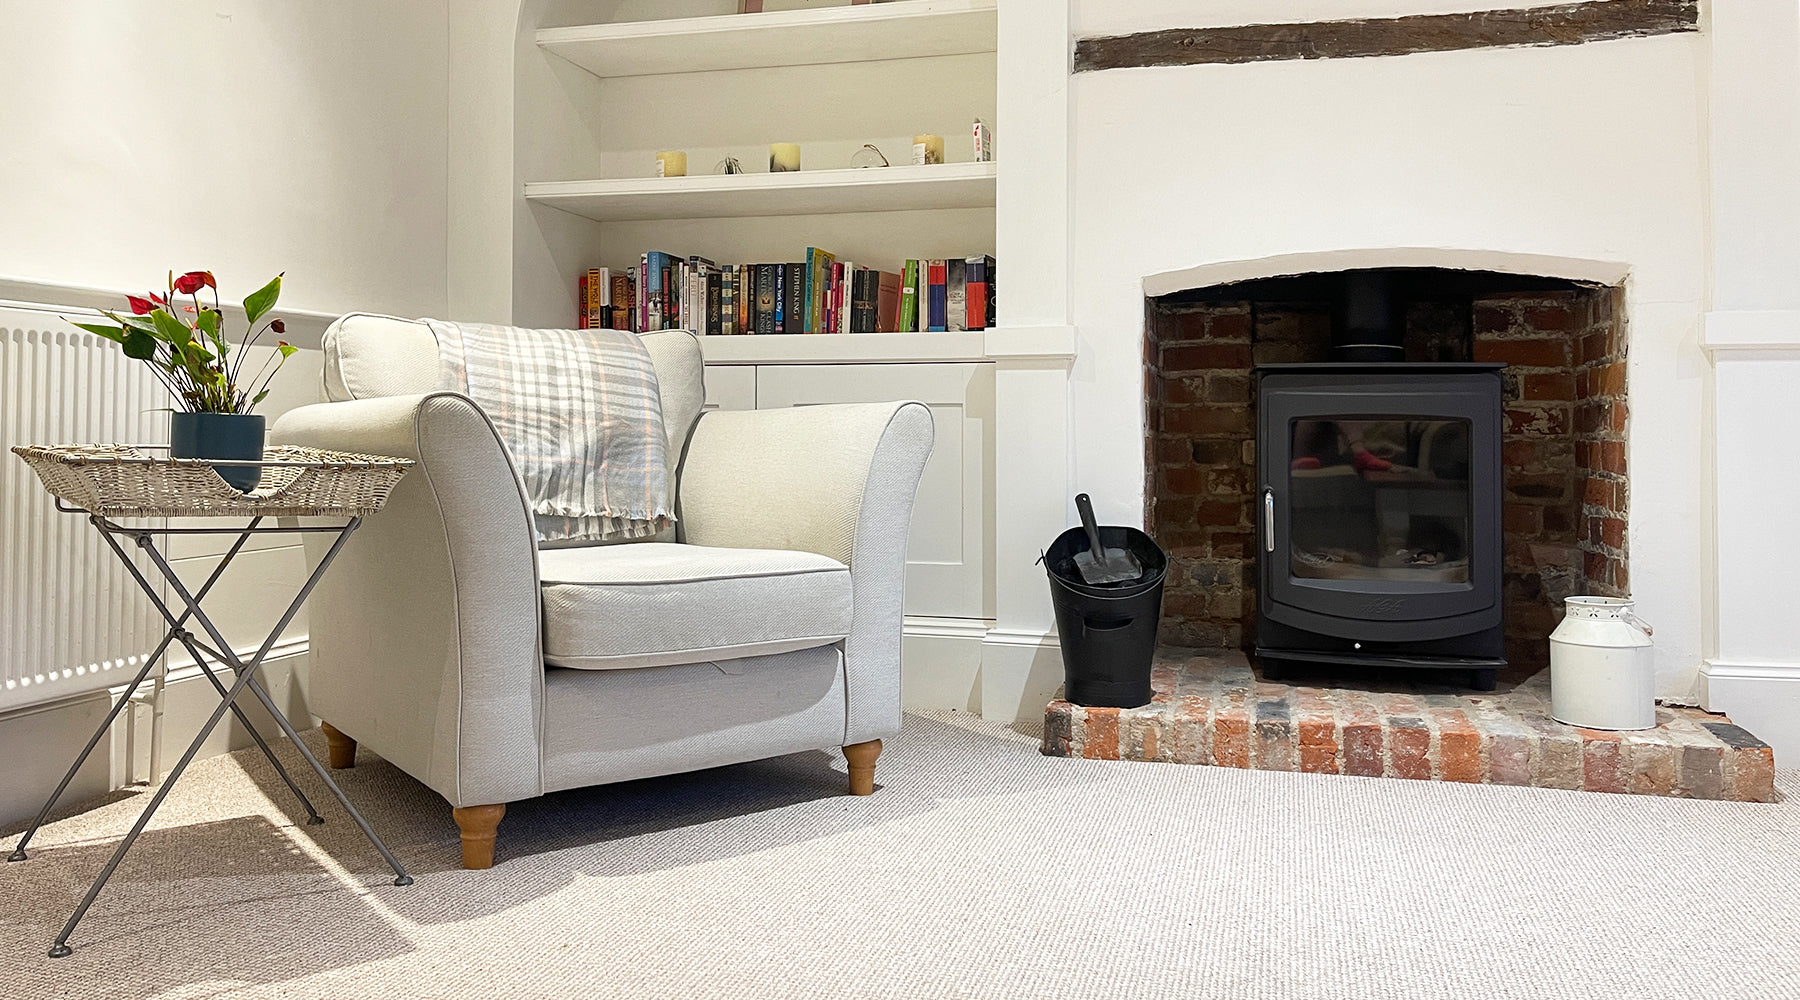 Single upholstered reading chair and fire place